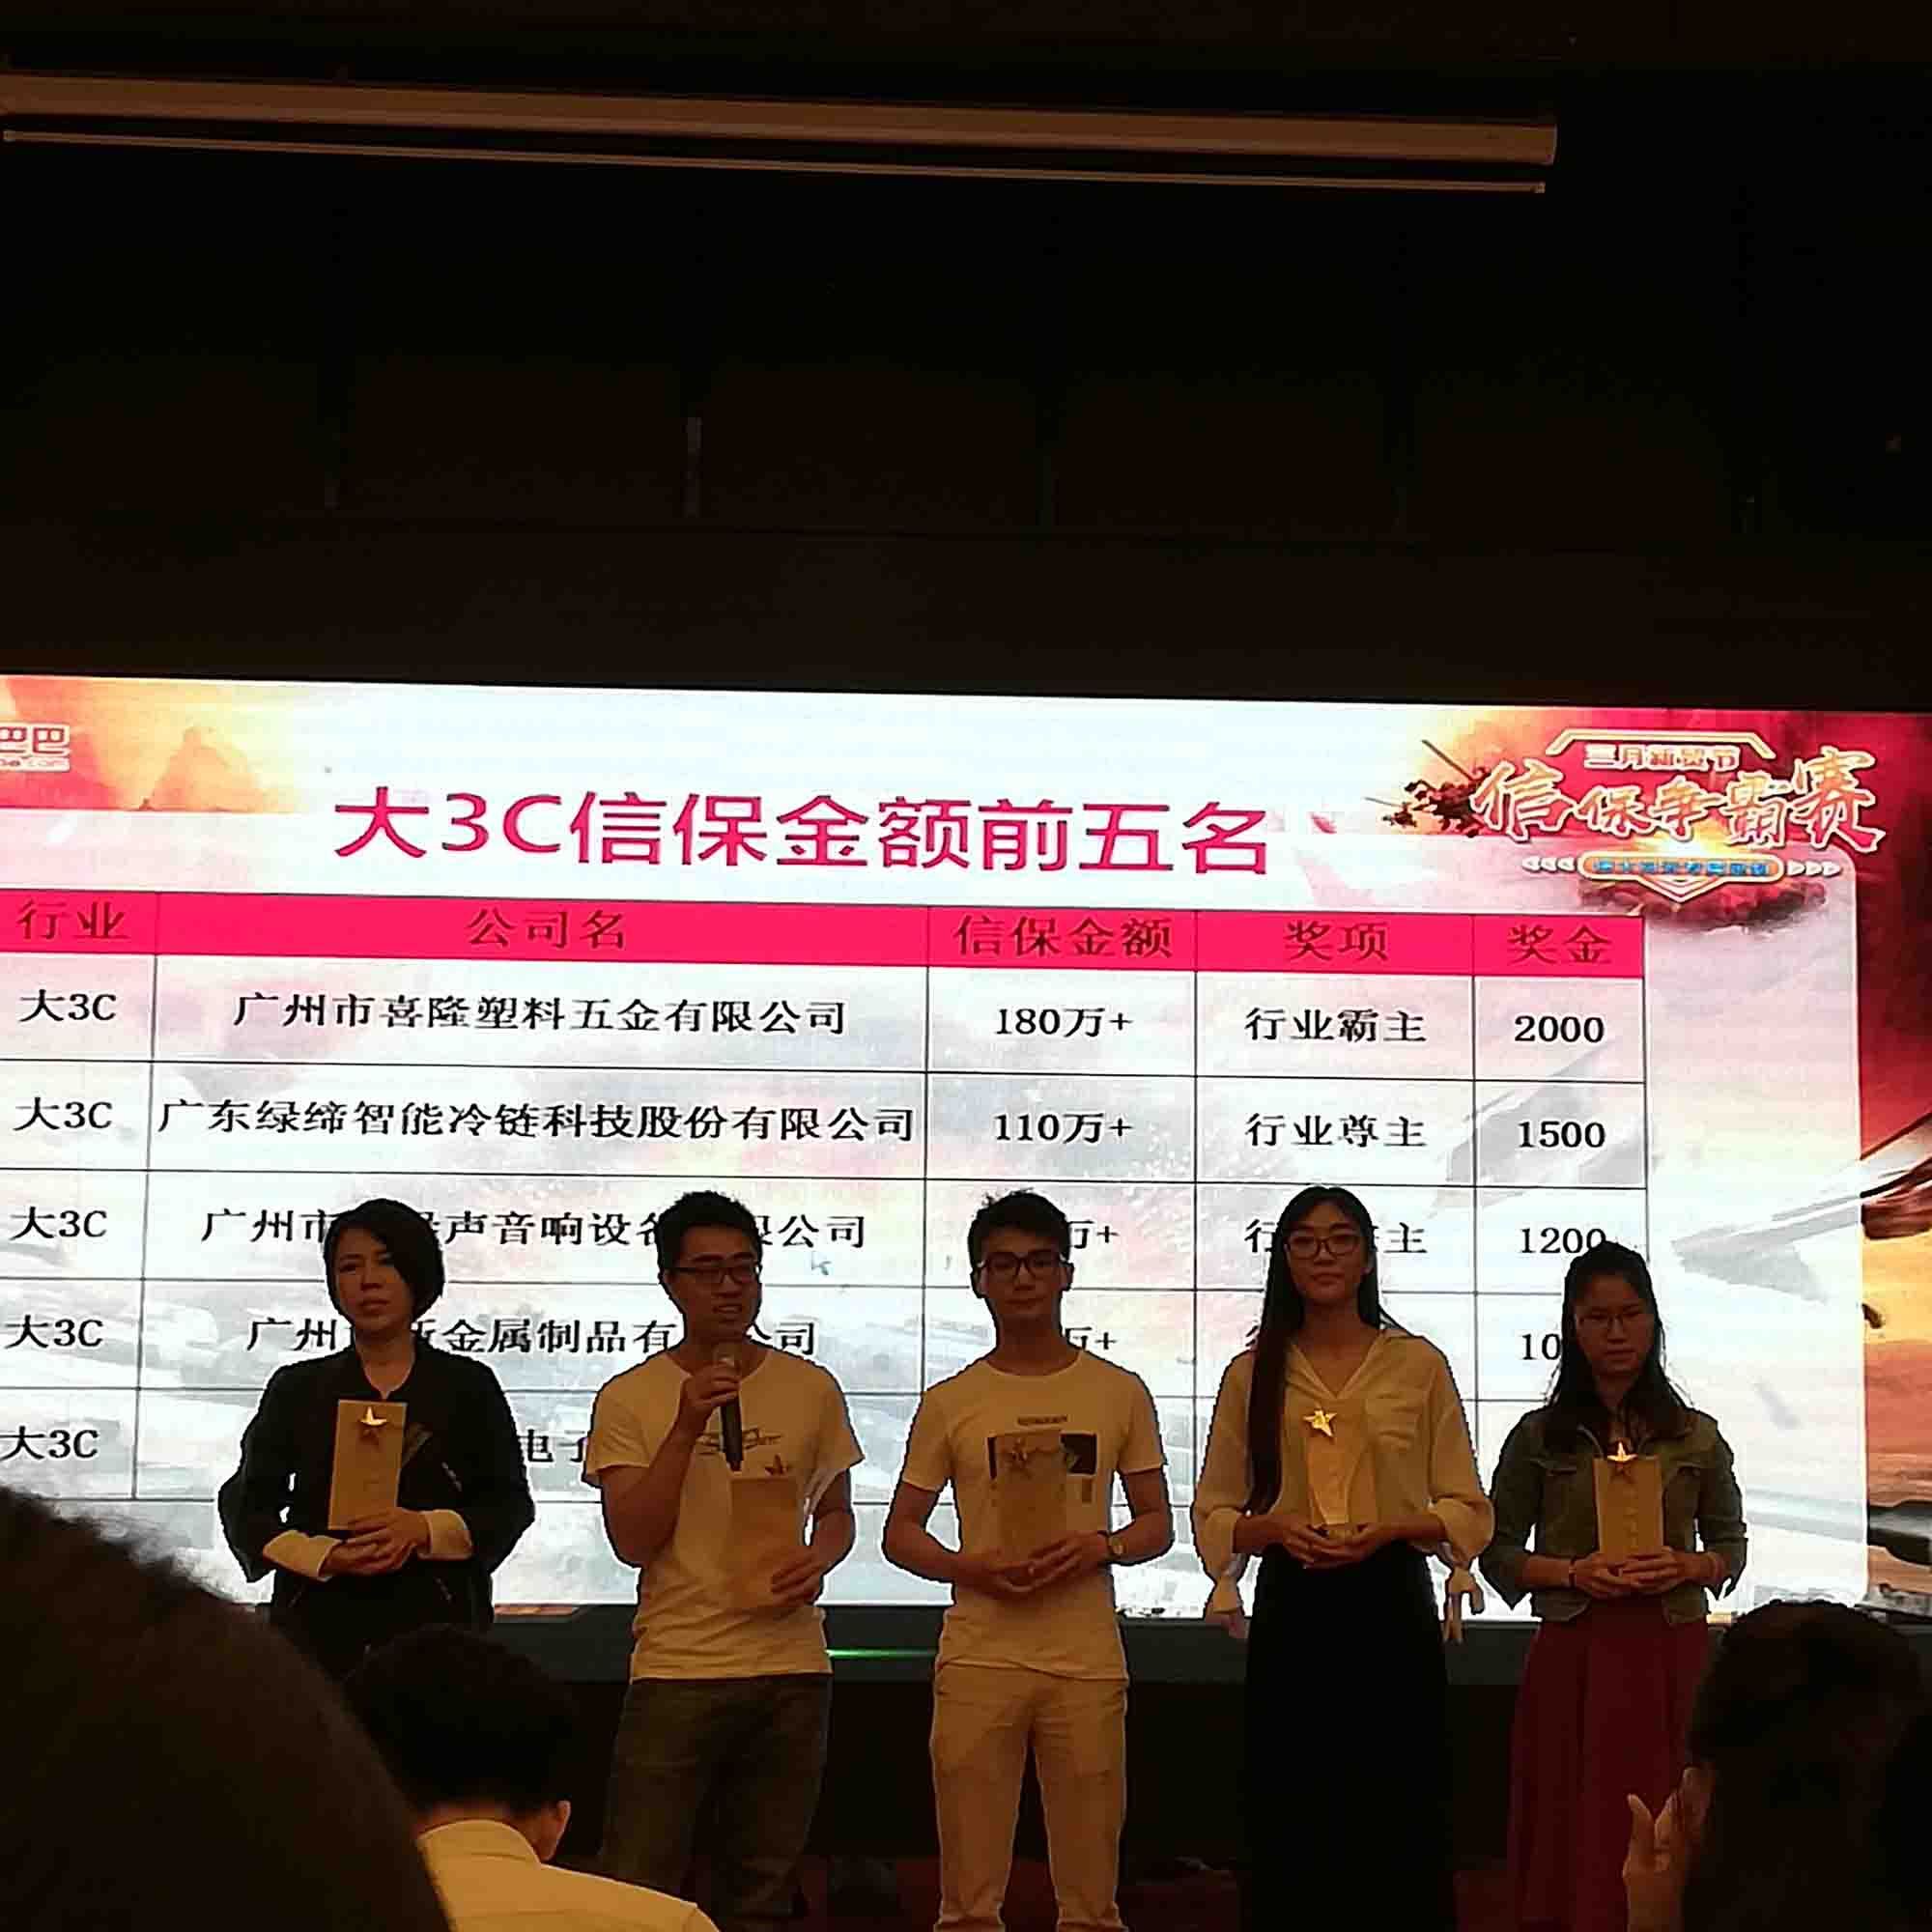 Congratulate Our Company Got the third place on Alibaba Trade Assurance Competition